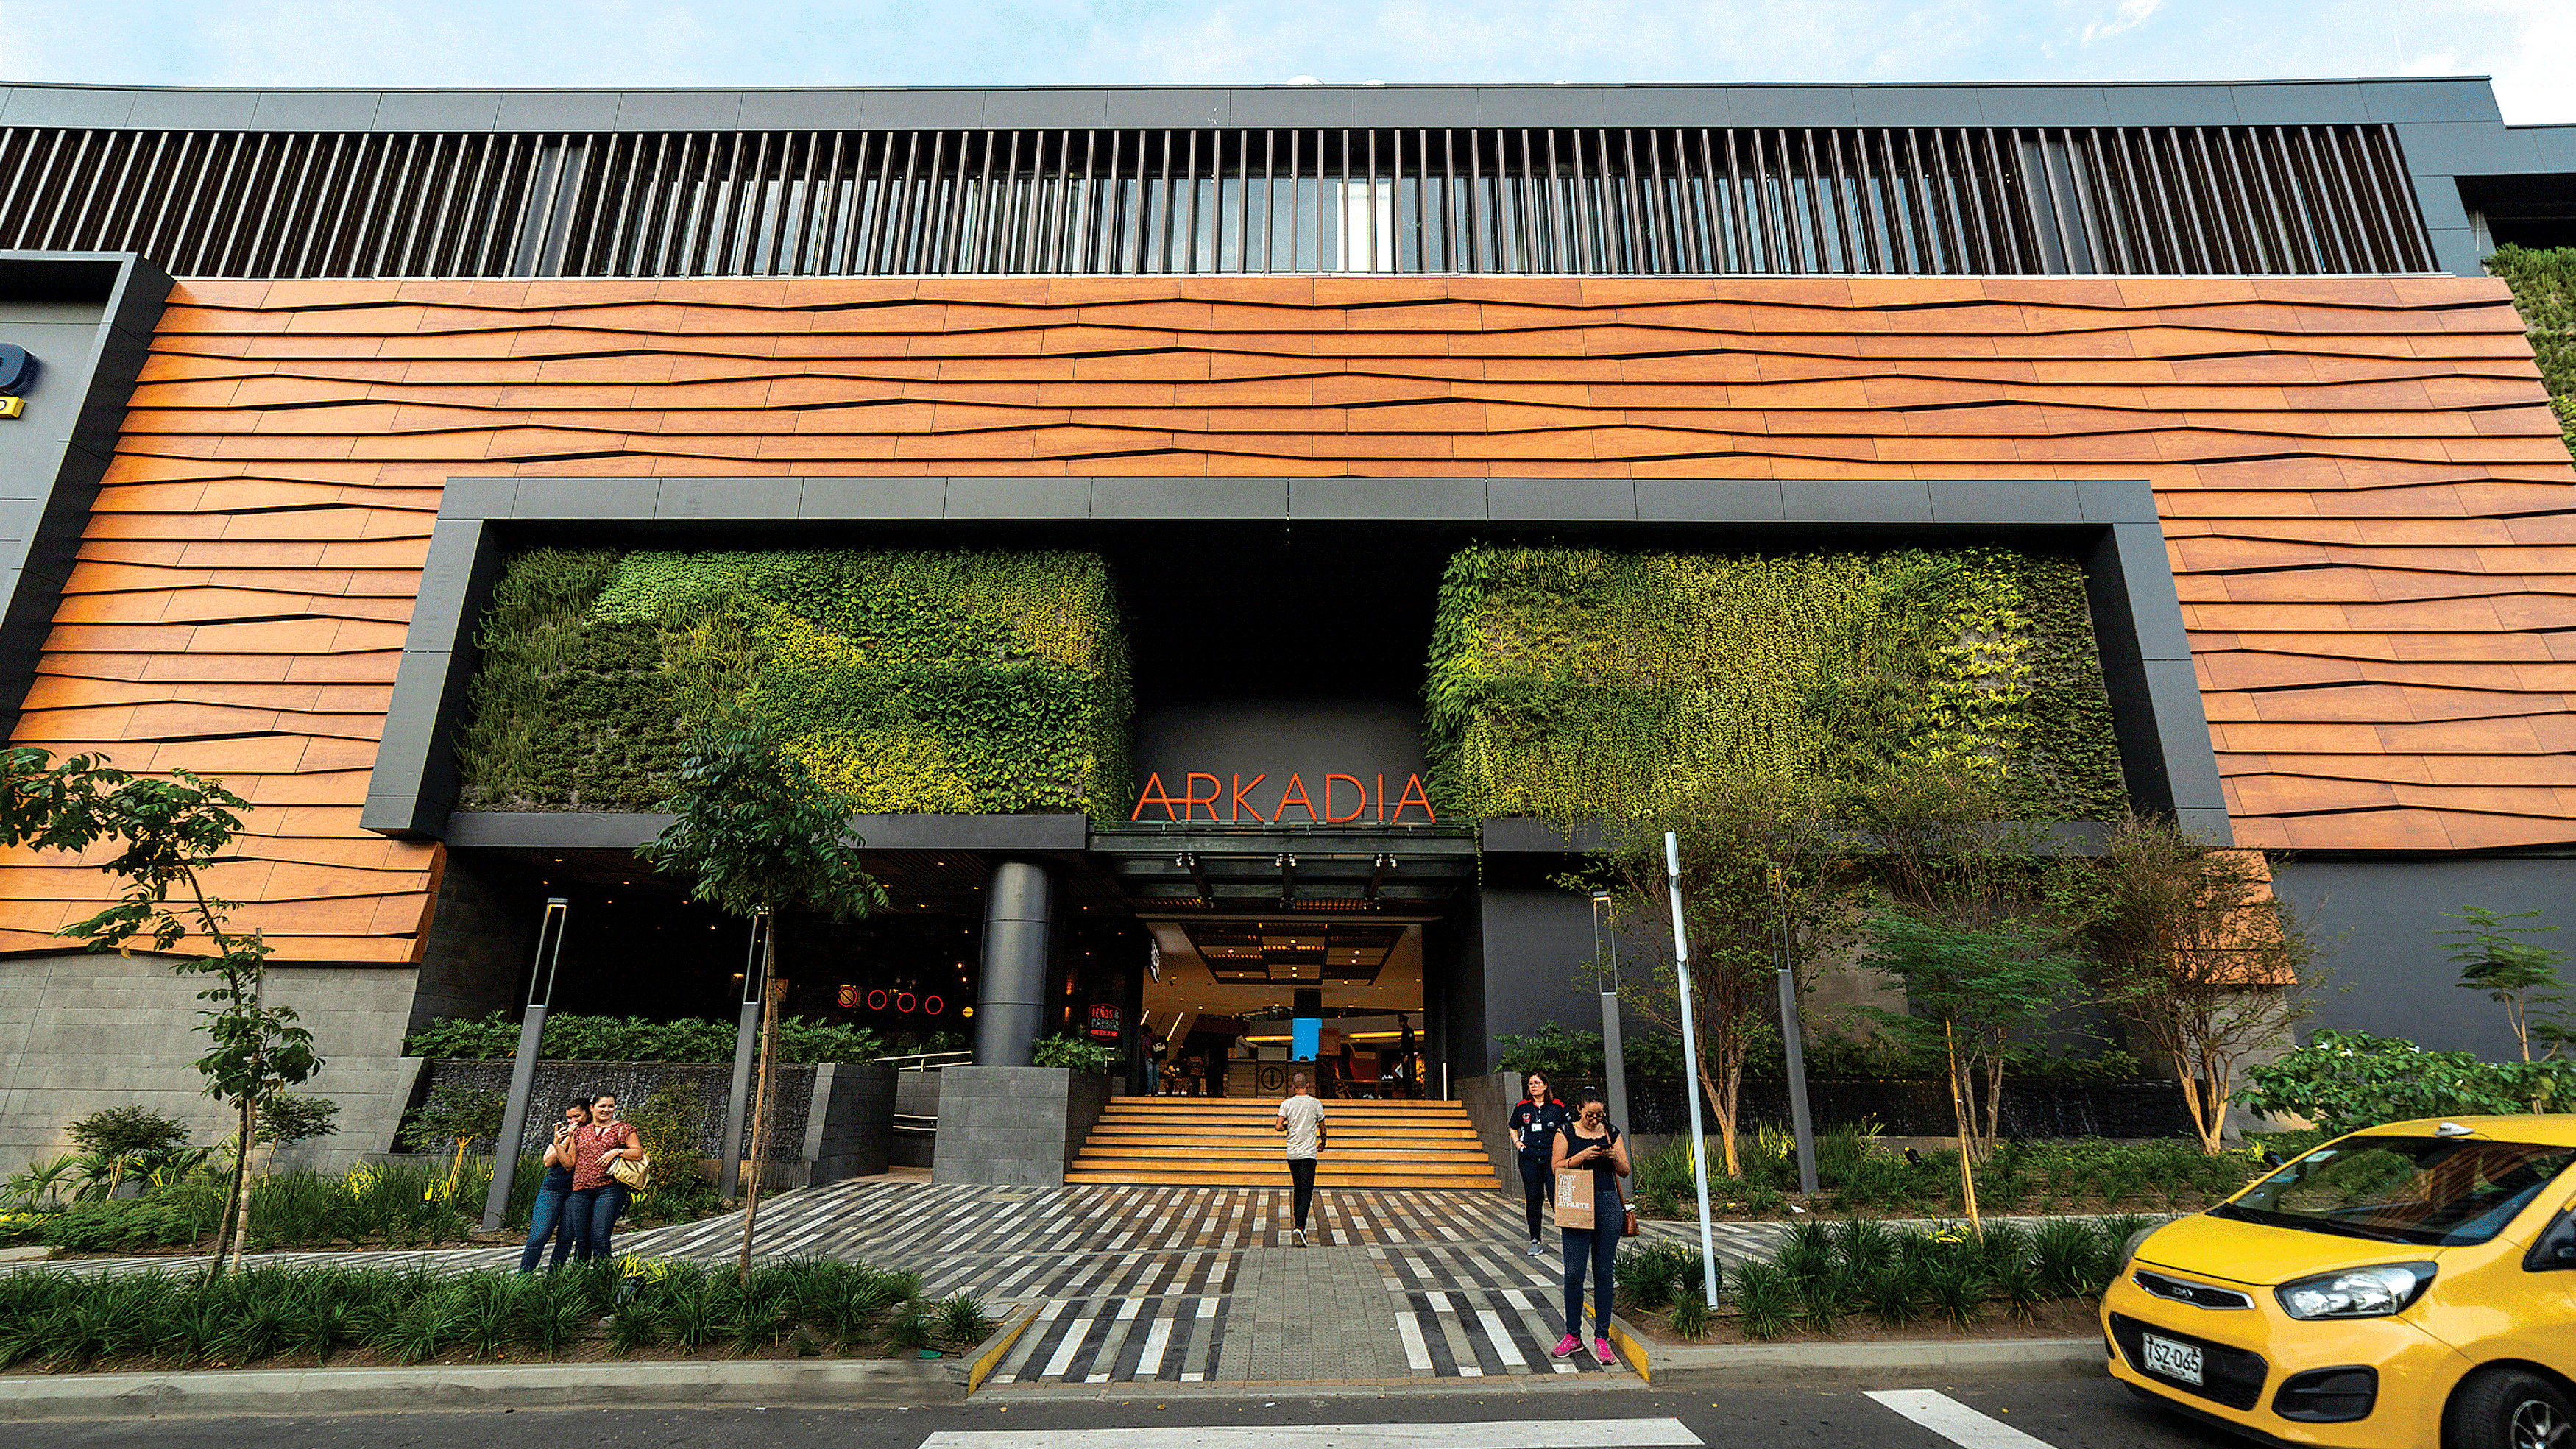 Arkadia Shopping mall exterior entrance with signage.